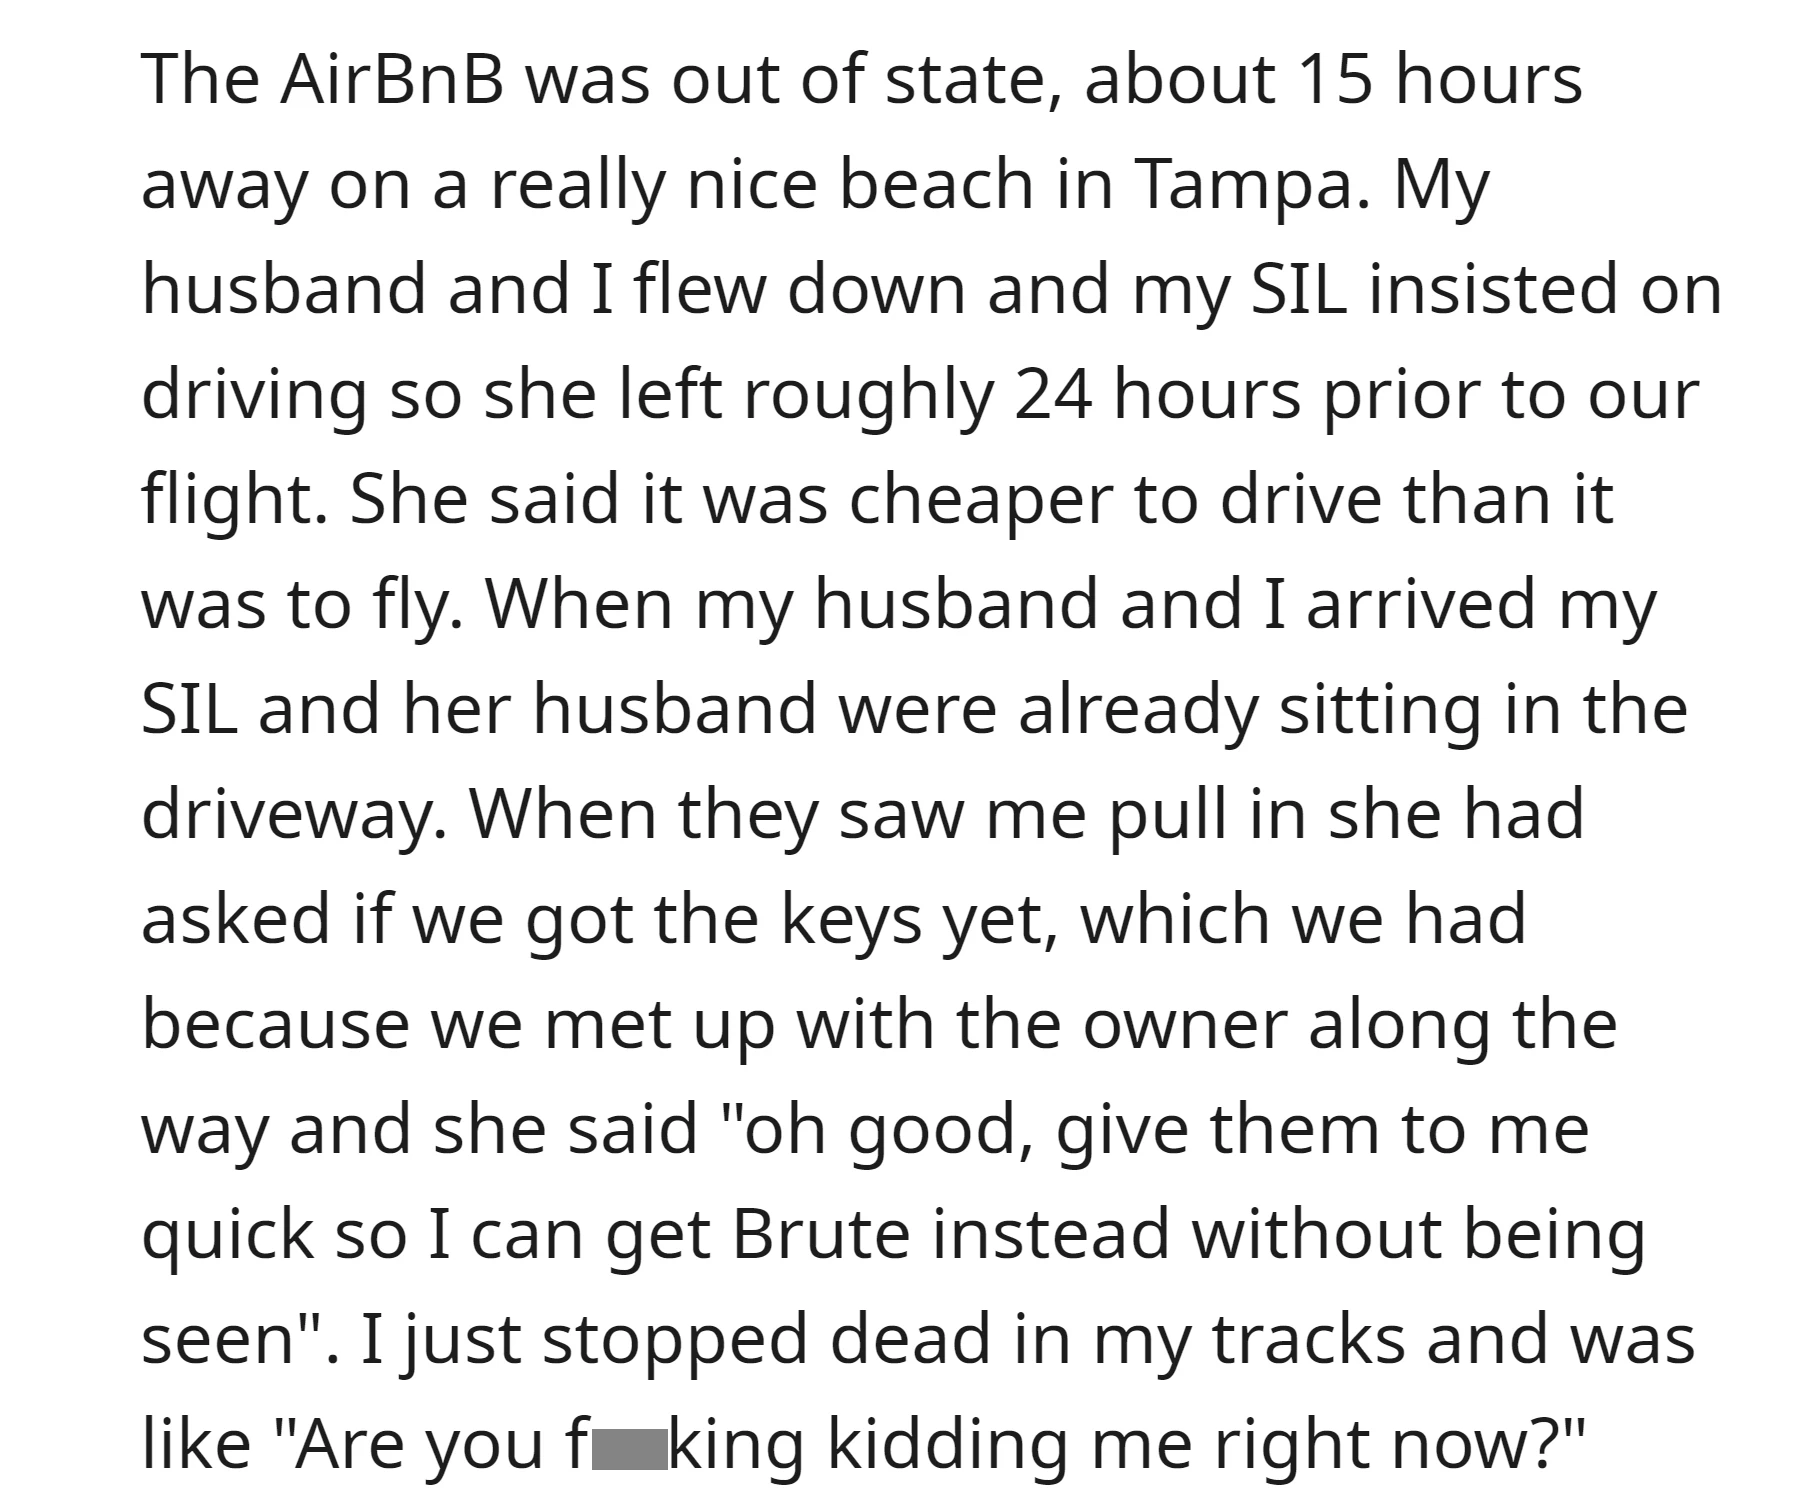 SIL planned to sneak her dog into the AirBnB